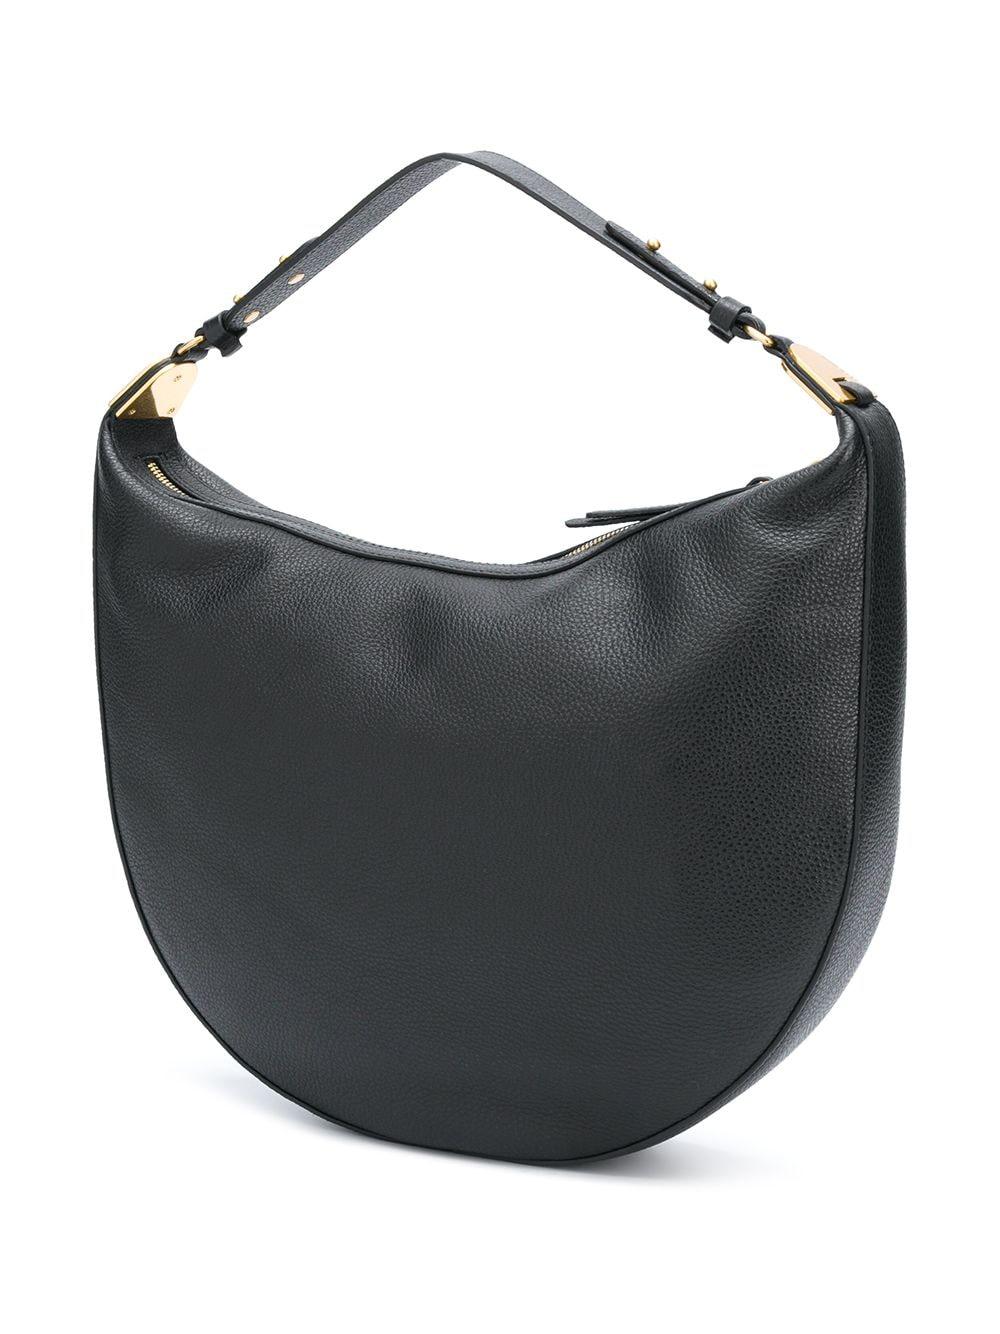 Coccinelle Rounded Leather Shoulder Bag in Black - Save 3% - Lyst